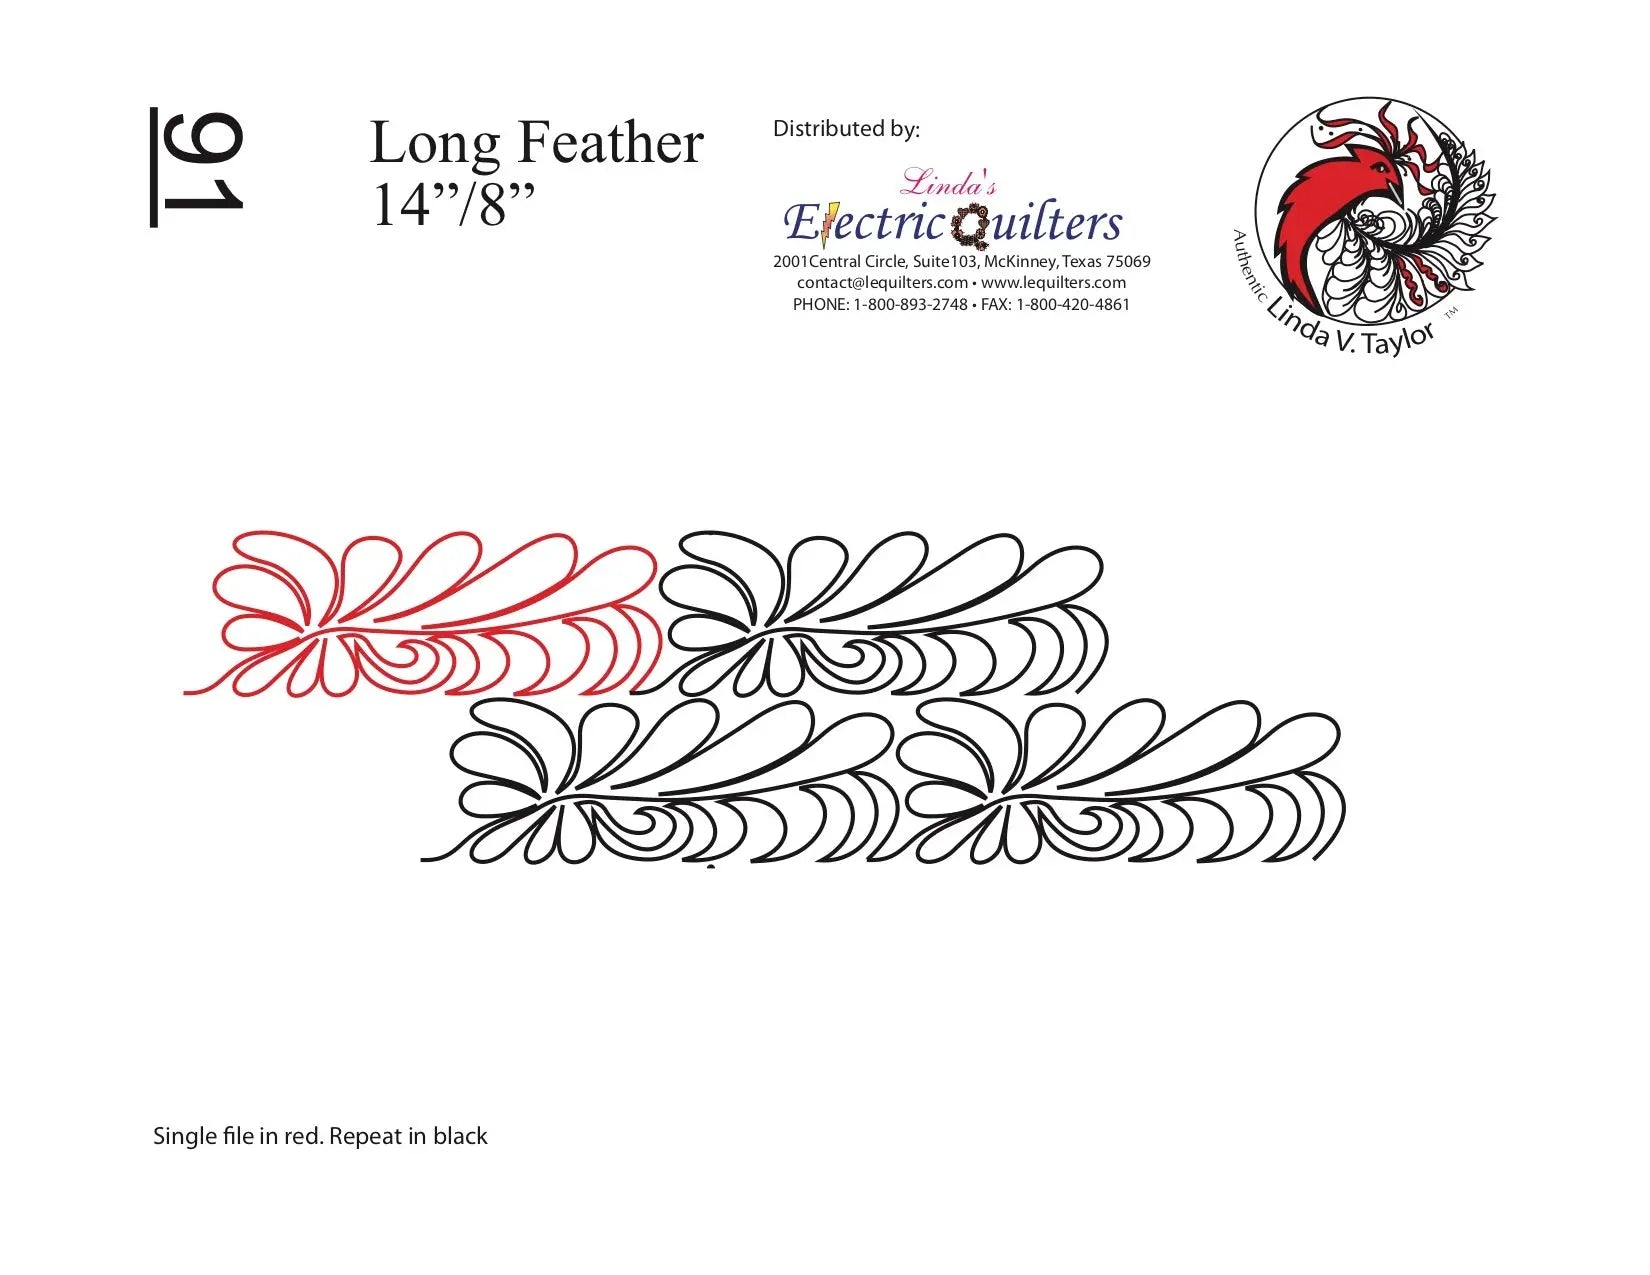 091 Long Feather Pantograph by Linda V. Taylor - Linda's Electric Quilters